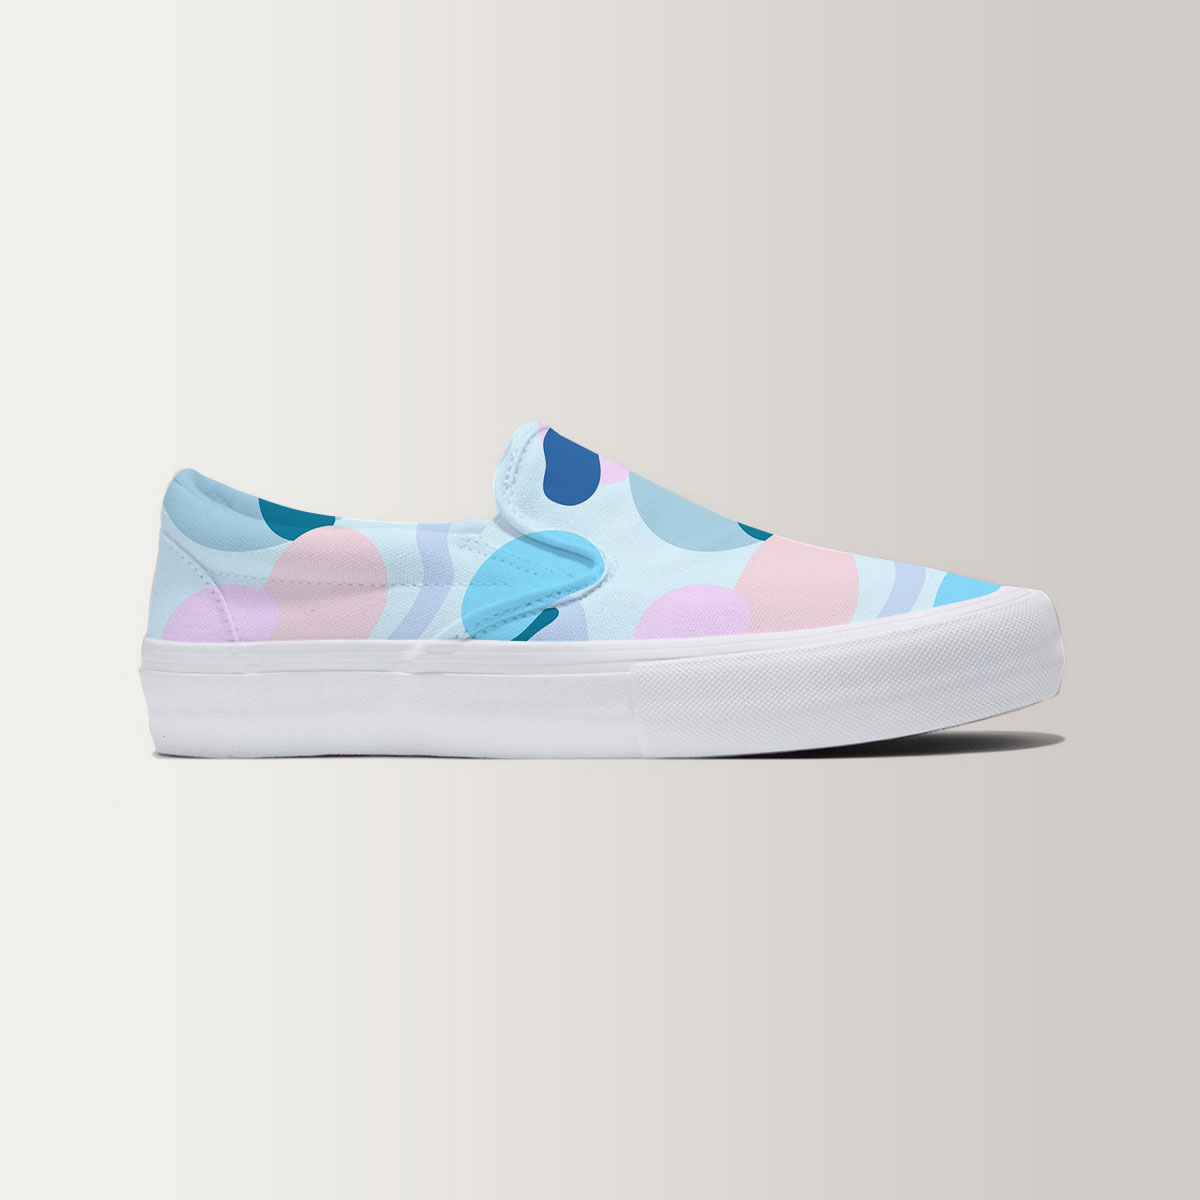 Colorful Abstract Minimalist Slip On Sneakers